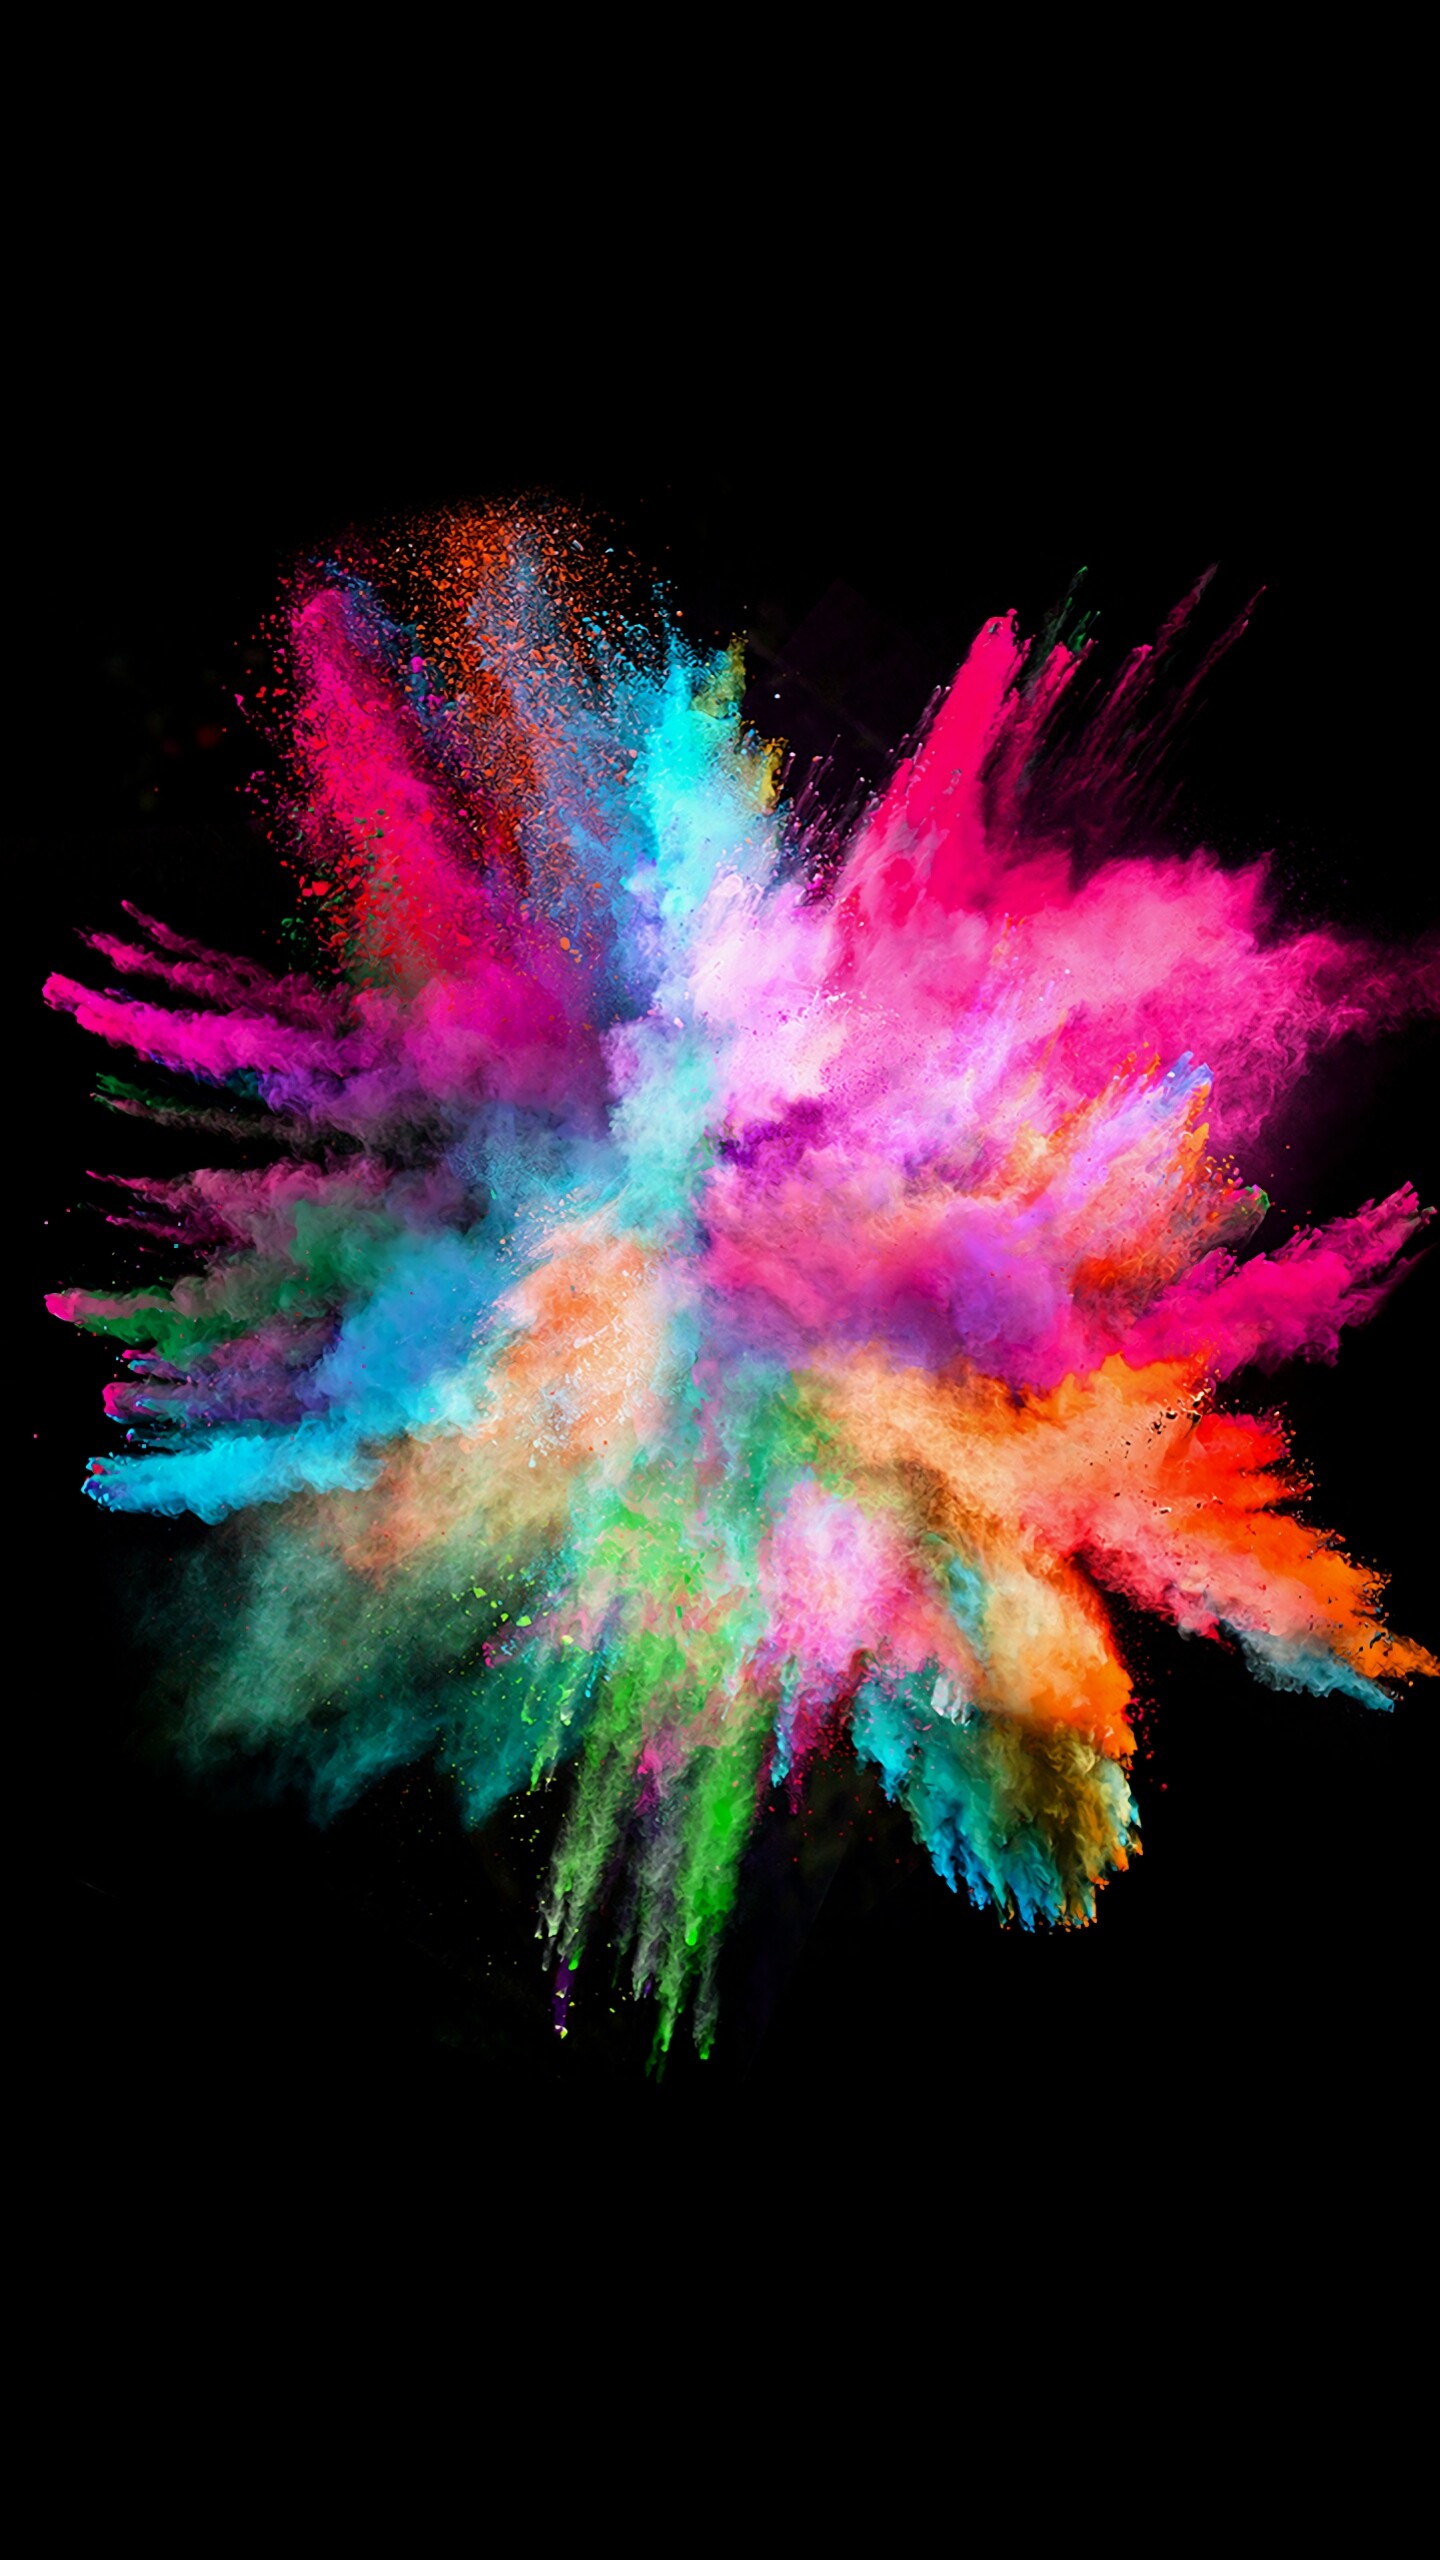 color Splash #wallpaper #colorful #galaxyedge7s Powder Being Thrown